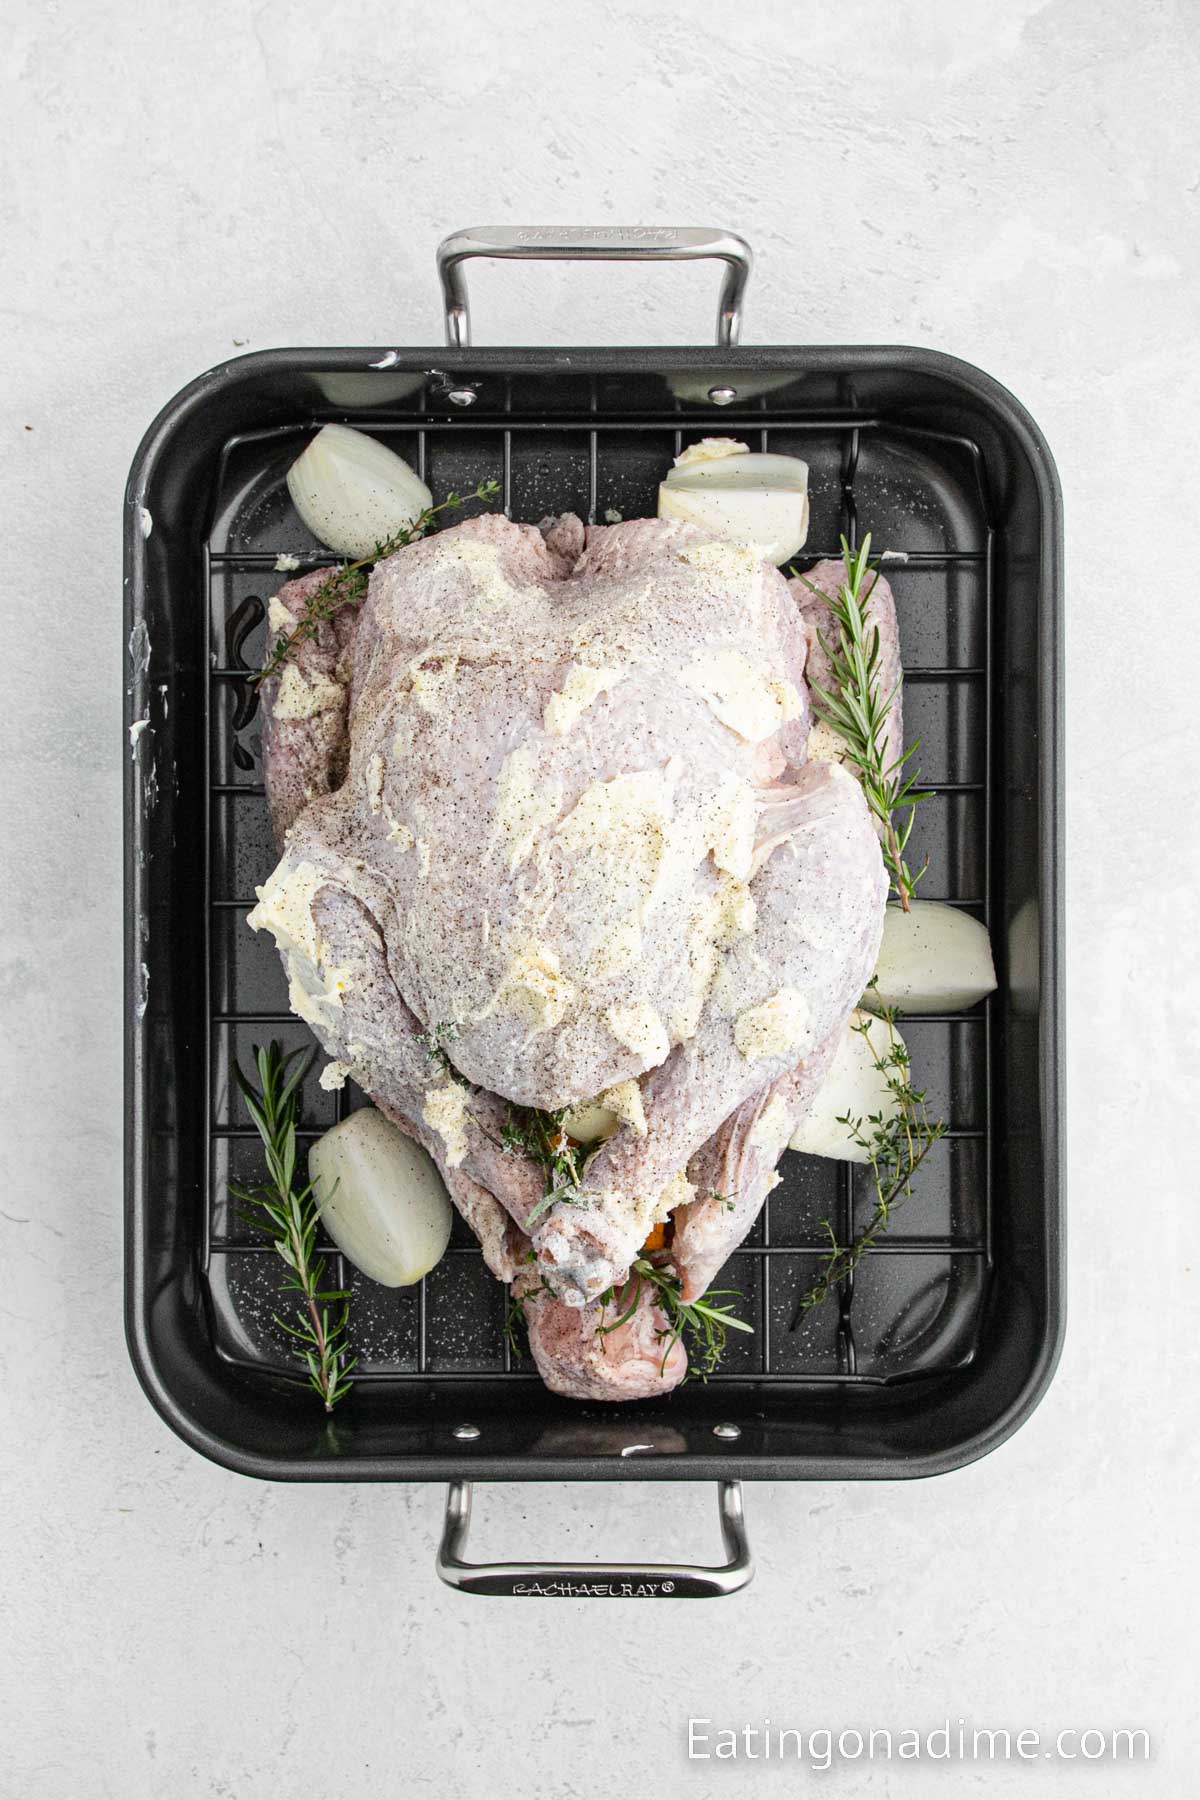 Covering the uncooked turkey with butter and seasoning in a roasting pan